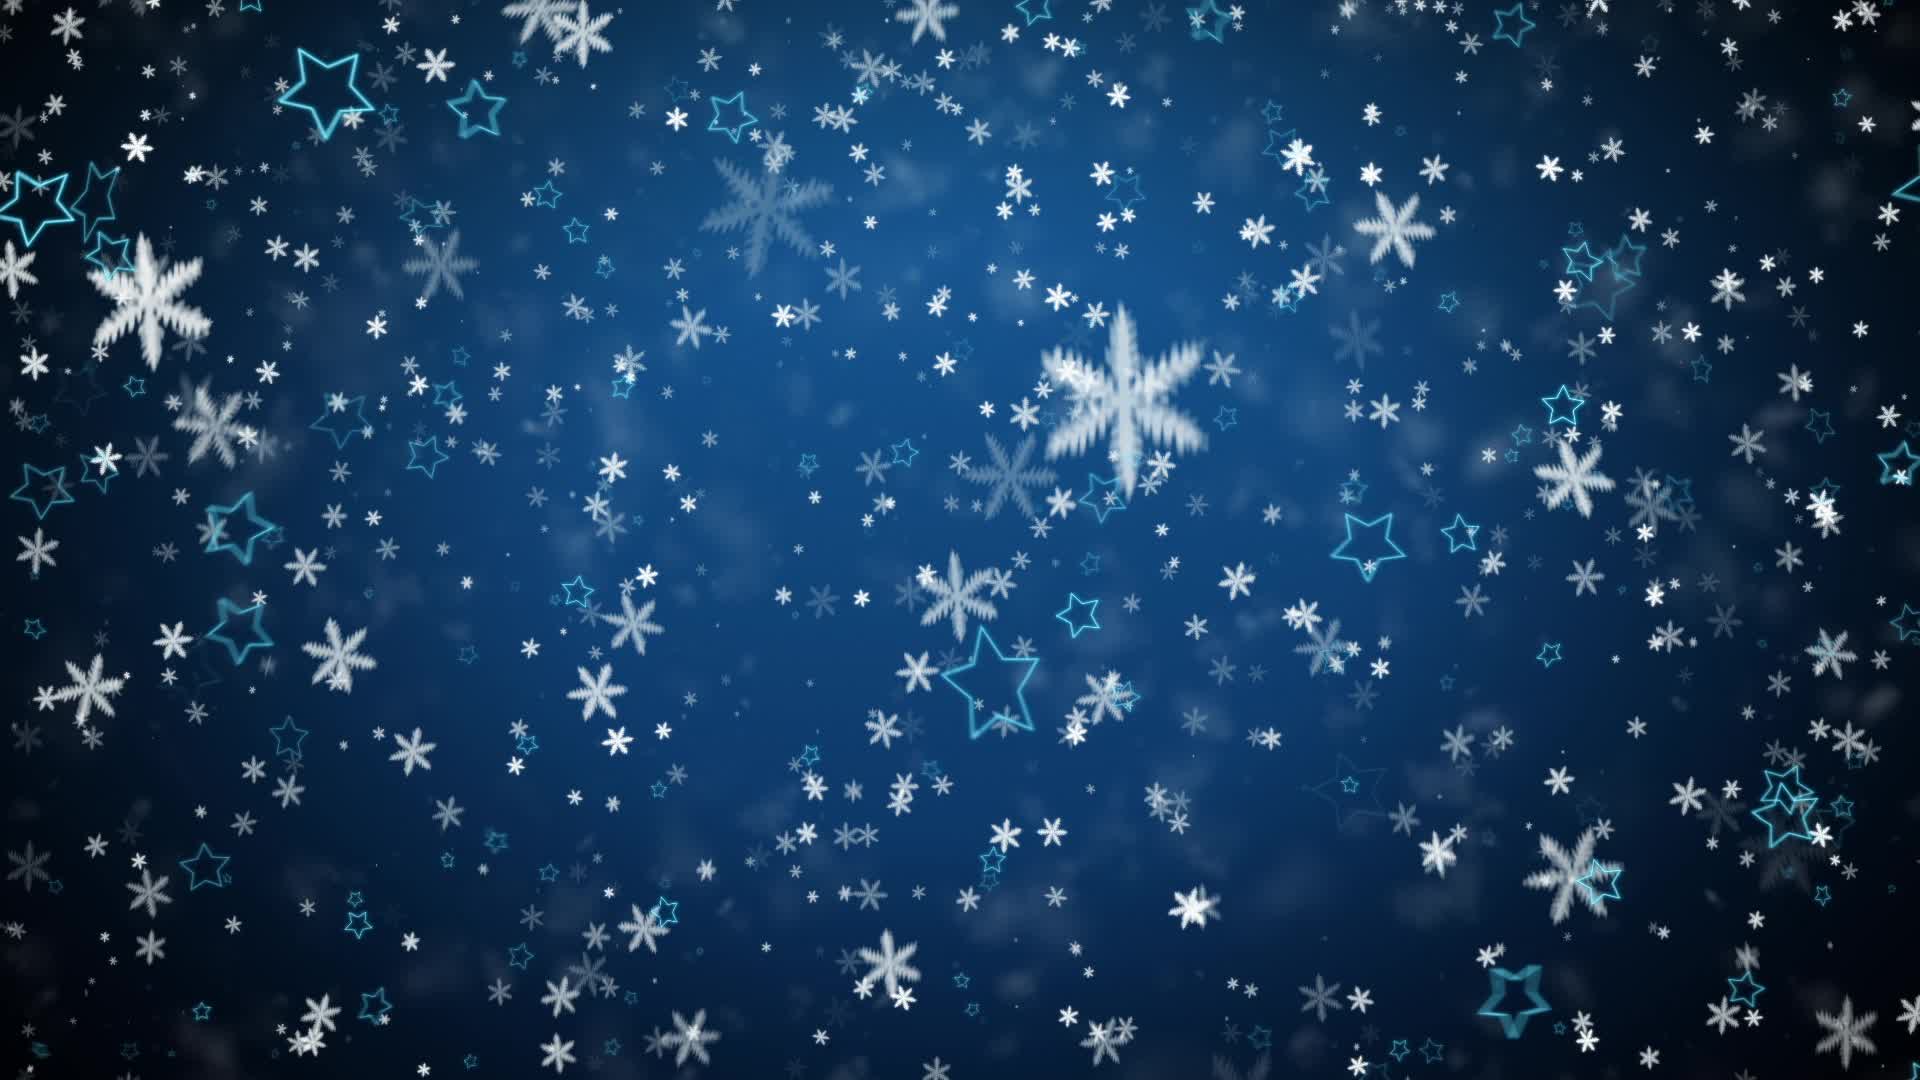 Winter background with falling snowflakes and stars ~ Hi Res #12449691